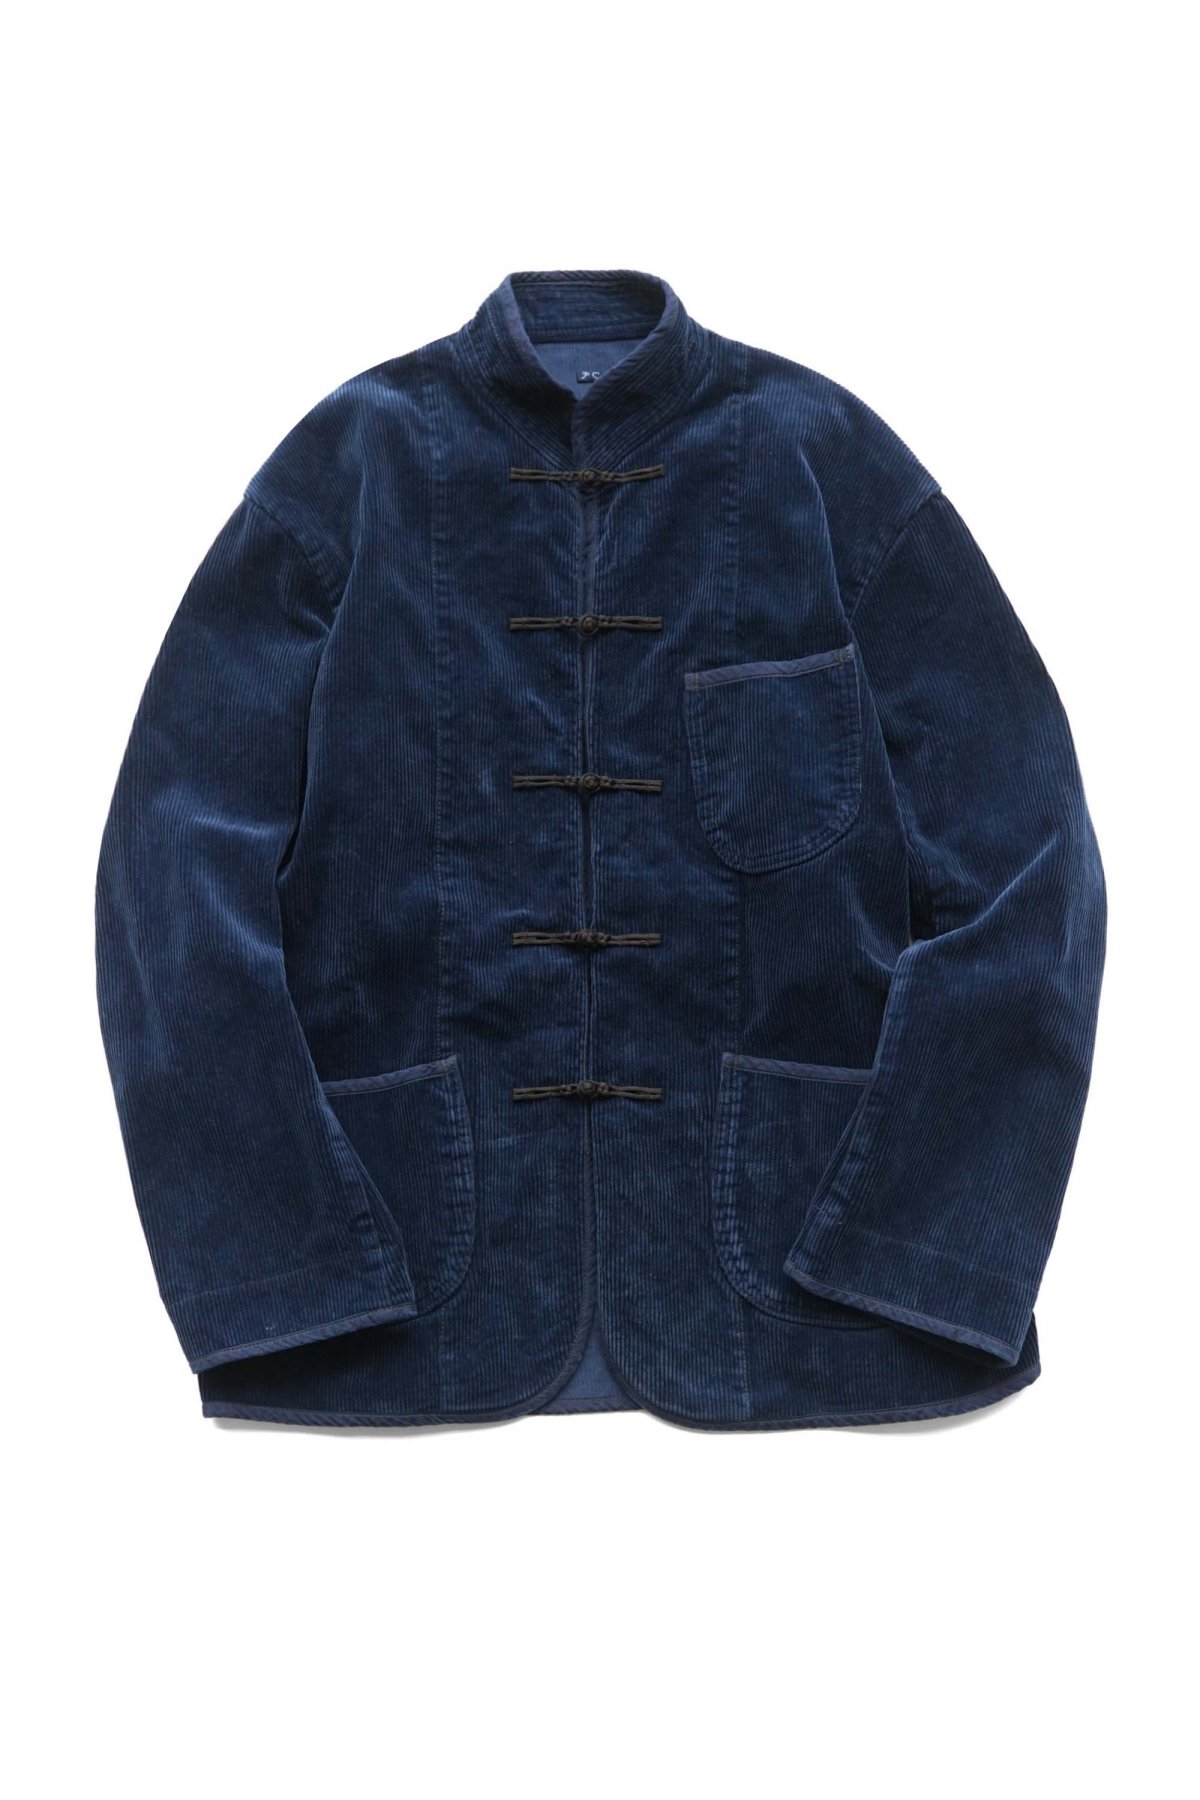 Porter Classic - CORDUROY CHINESE JACKET - WATCH CHAIN ITEM - BLUE ...